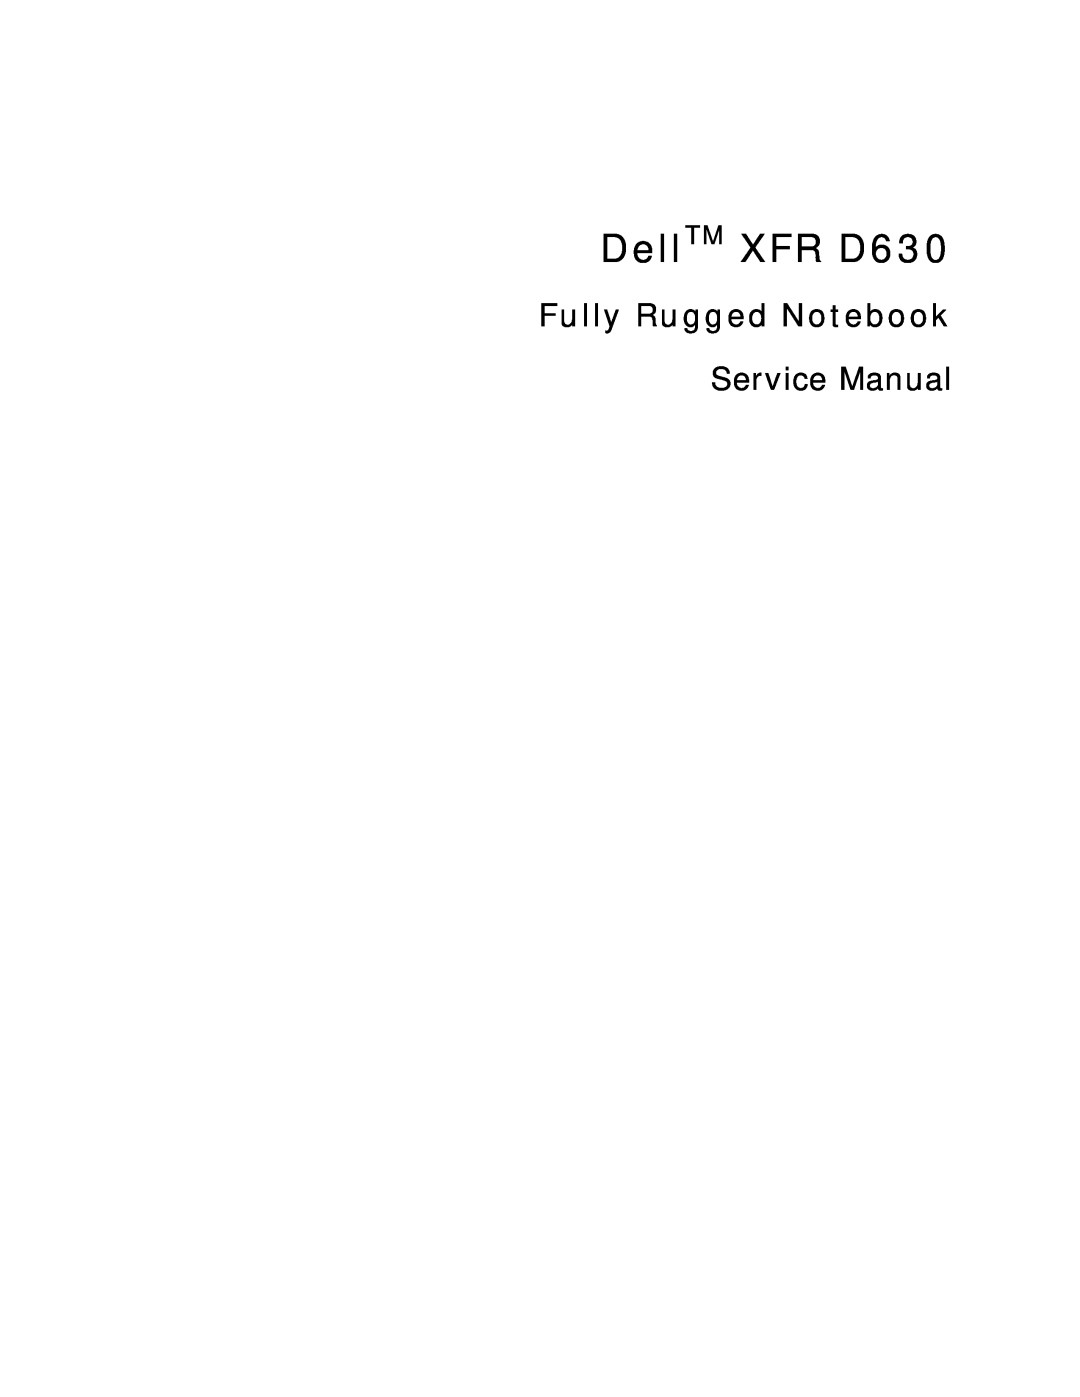 Dell service manual Fully Rugged Notebook, DellTM XFR D630, Service Manual 